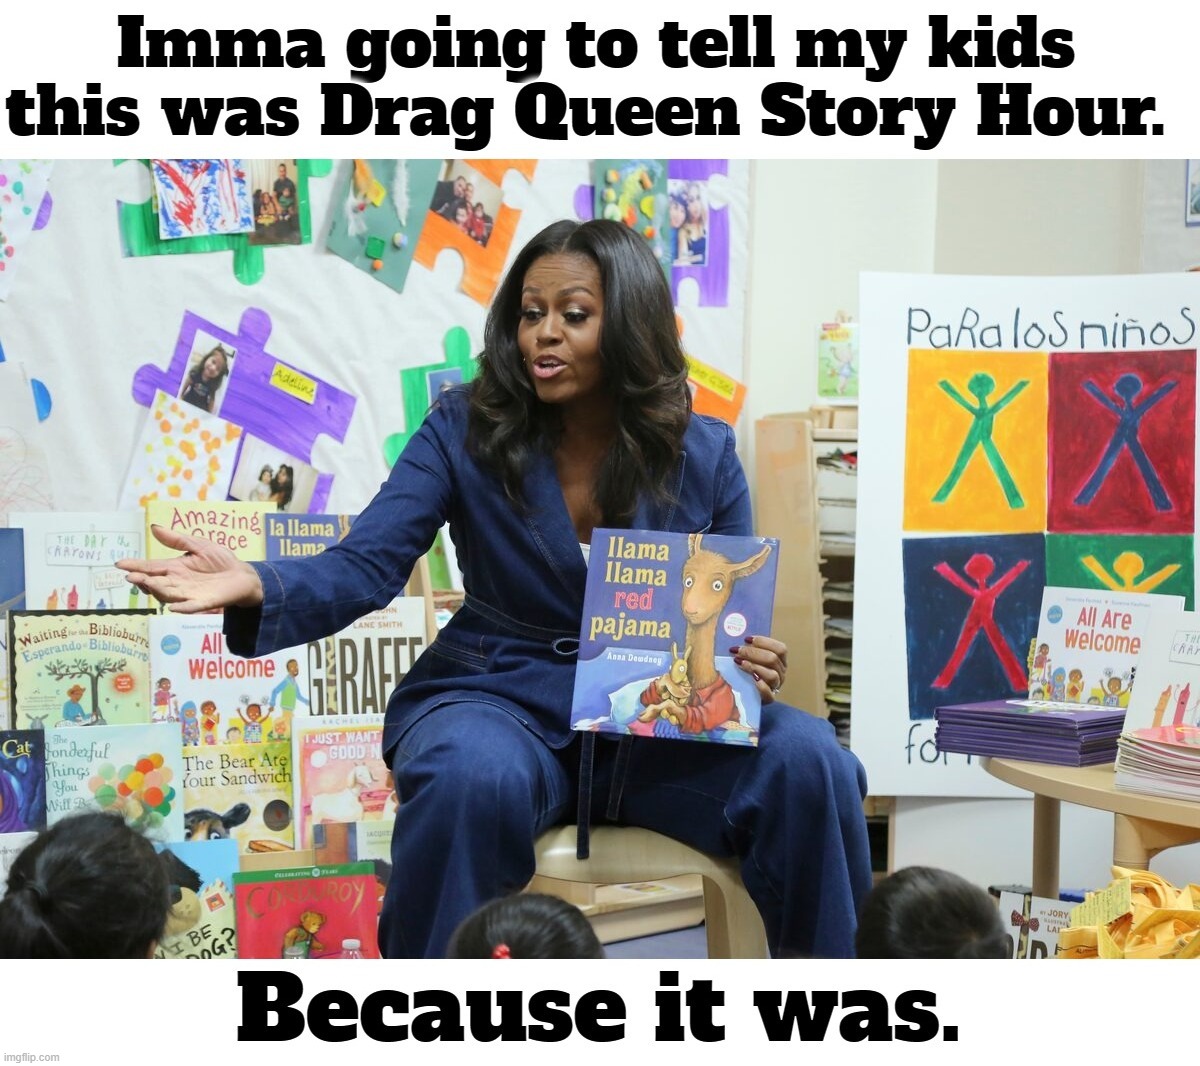 Imma going to tell my kids this was Drag Queen Story Hour | image tagged in drag queen story hour,michelle obama,ok groomer,tired of hearing about transgenders,michael lavaughn robinson | made w/ Imgflip meme maker